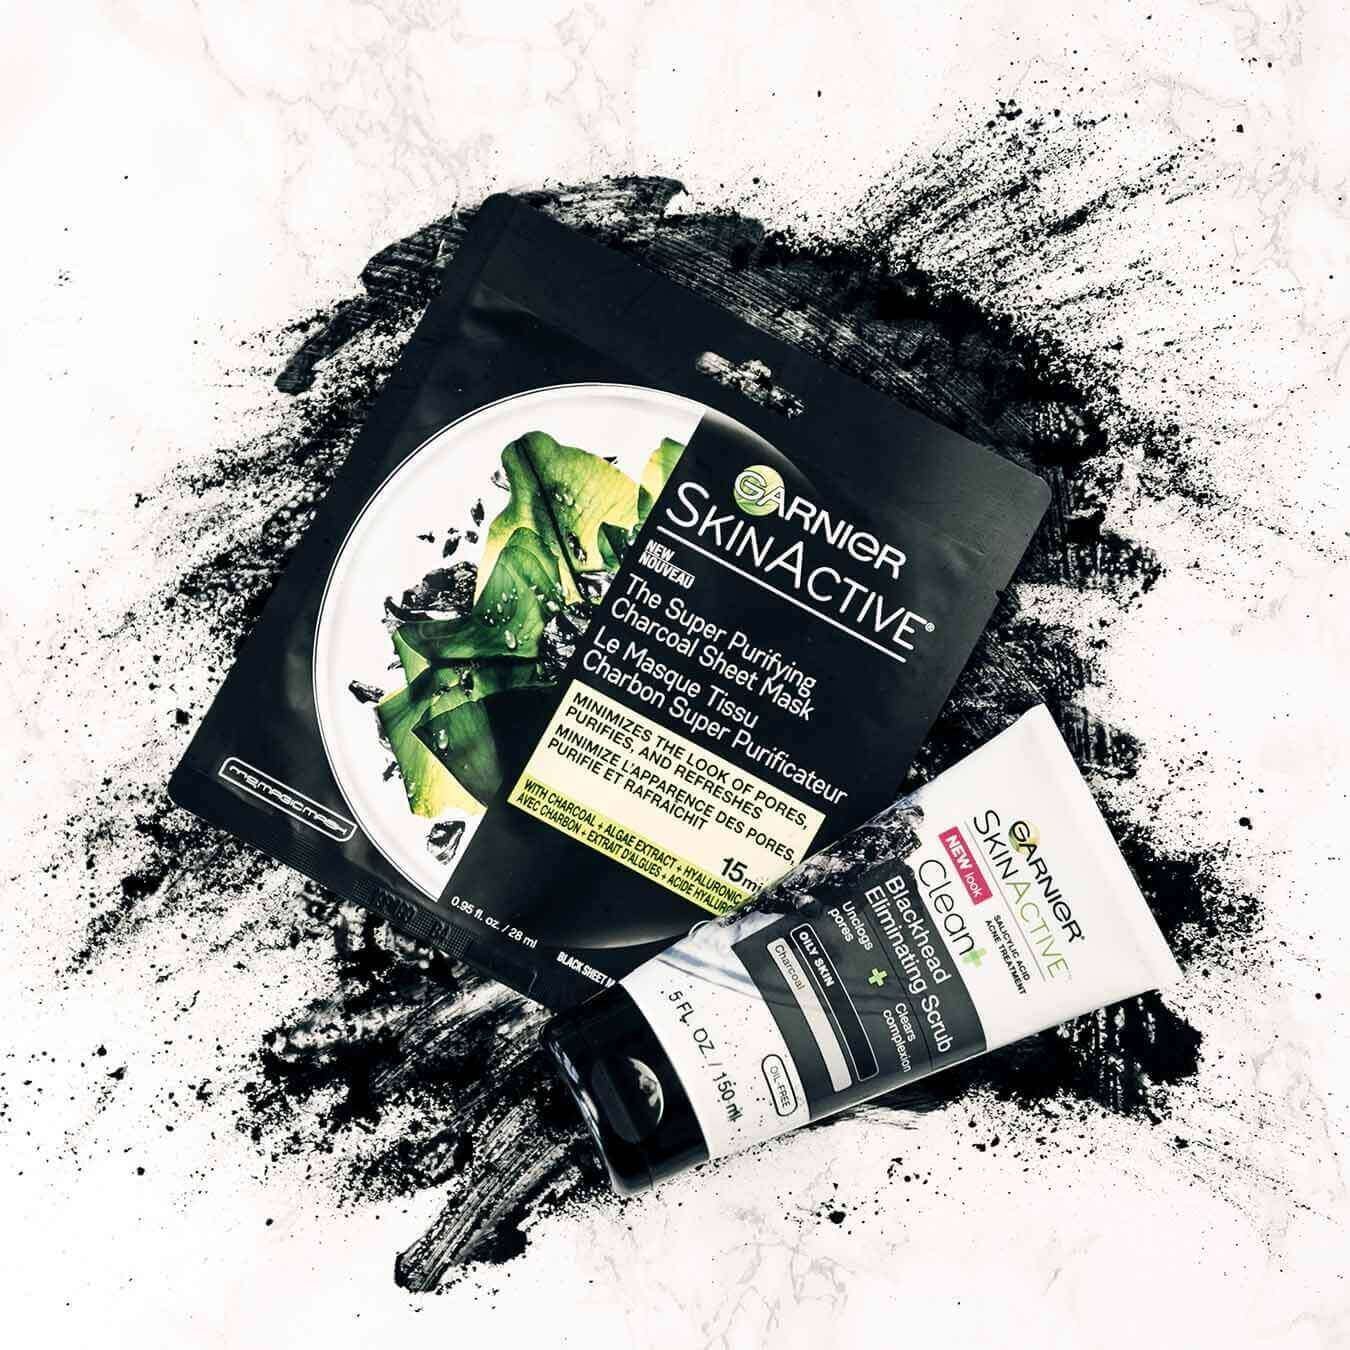 Garnier SkinActive Super Purifying Charcoal Sheet Mask and SkinActive Clean+ Blackhead Eliminating Scrub on an explosion of charcoal powder on pinkish white marble.